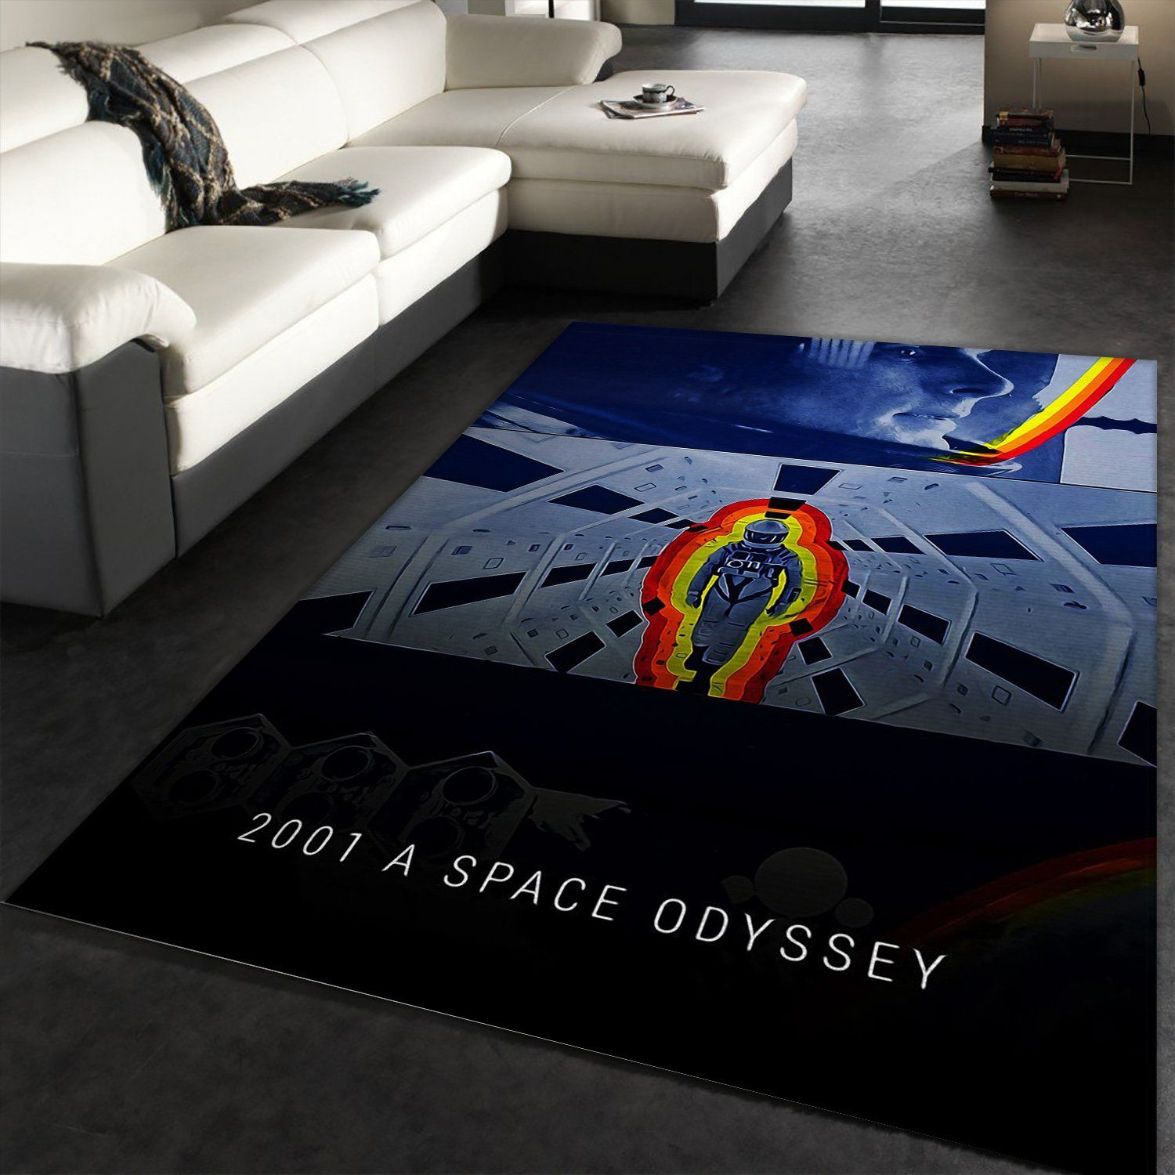 2001 A Space Odyssey Area Rug Art Painting Movie Rugs Home US Decor